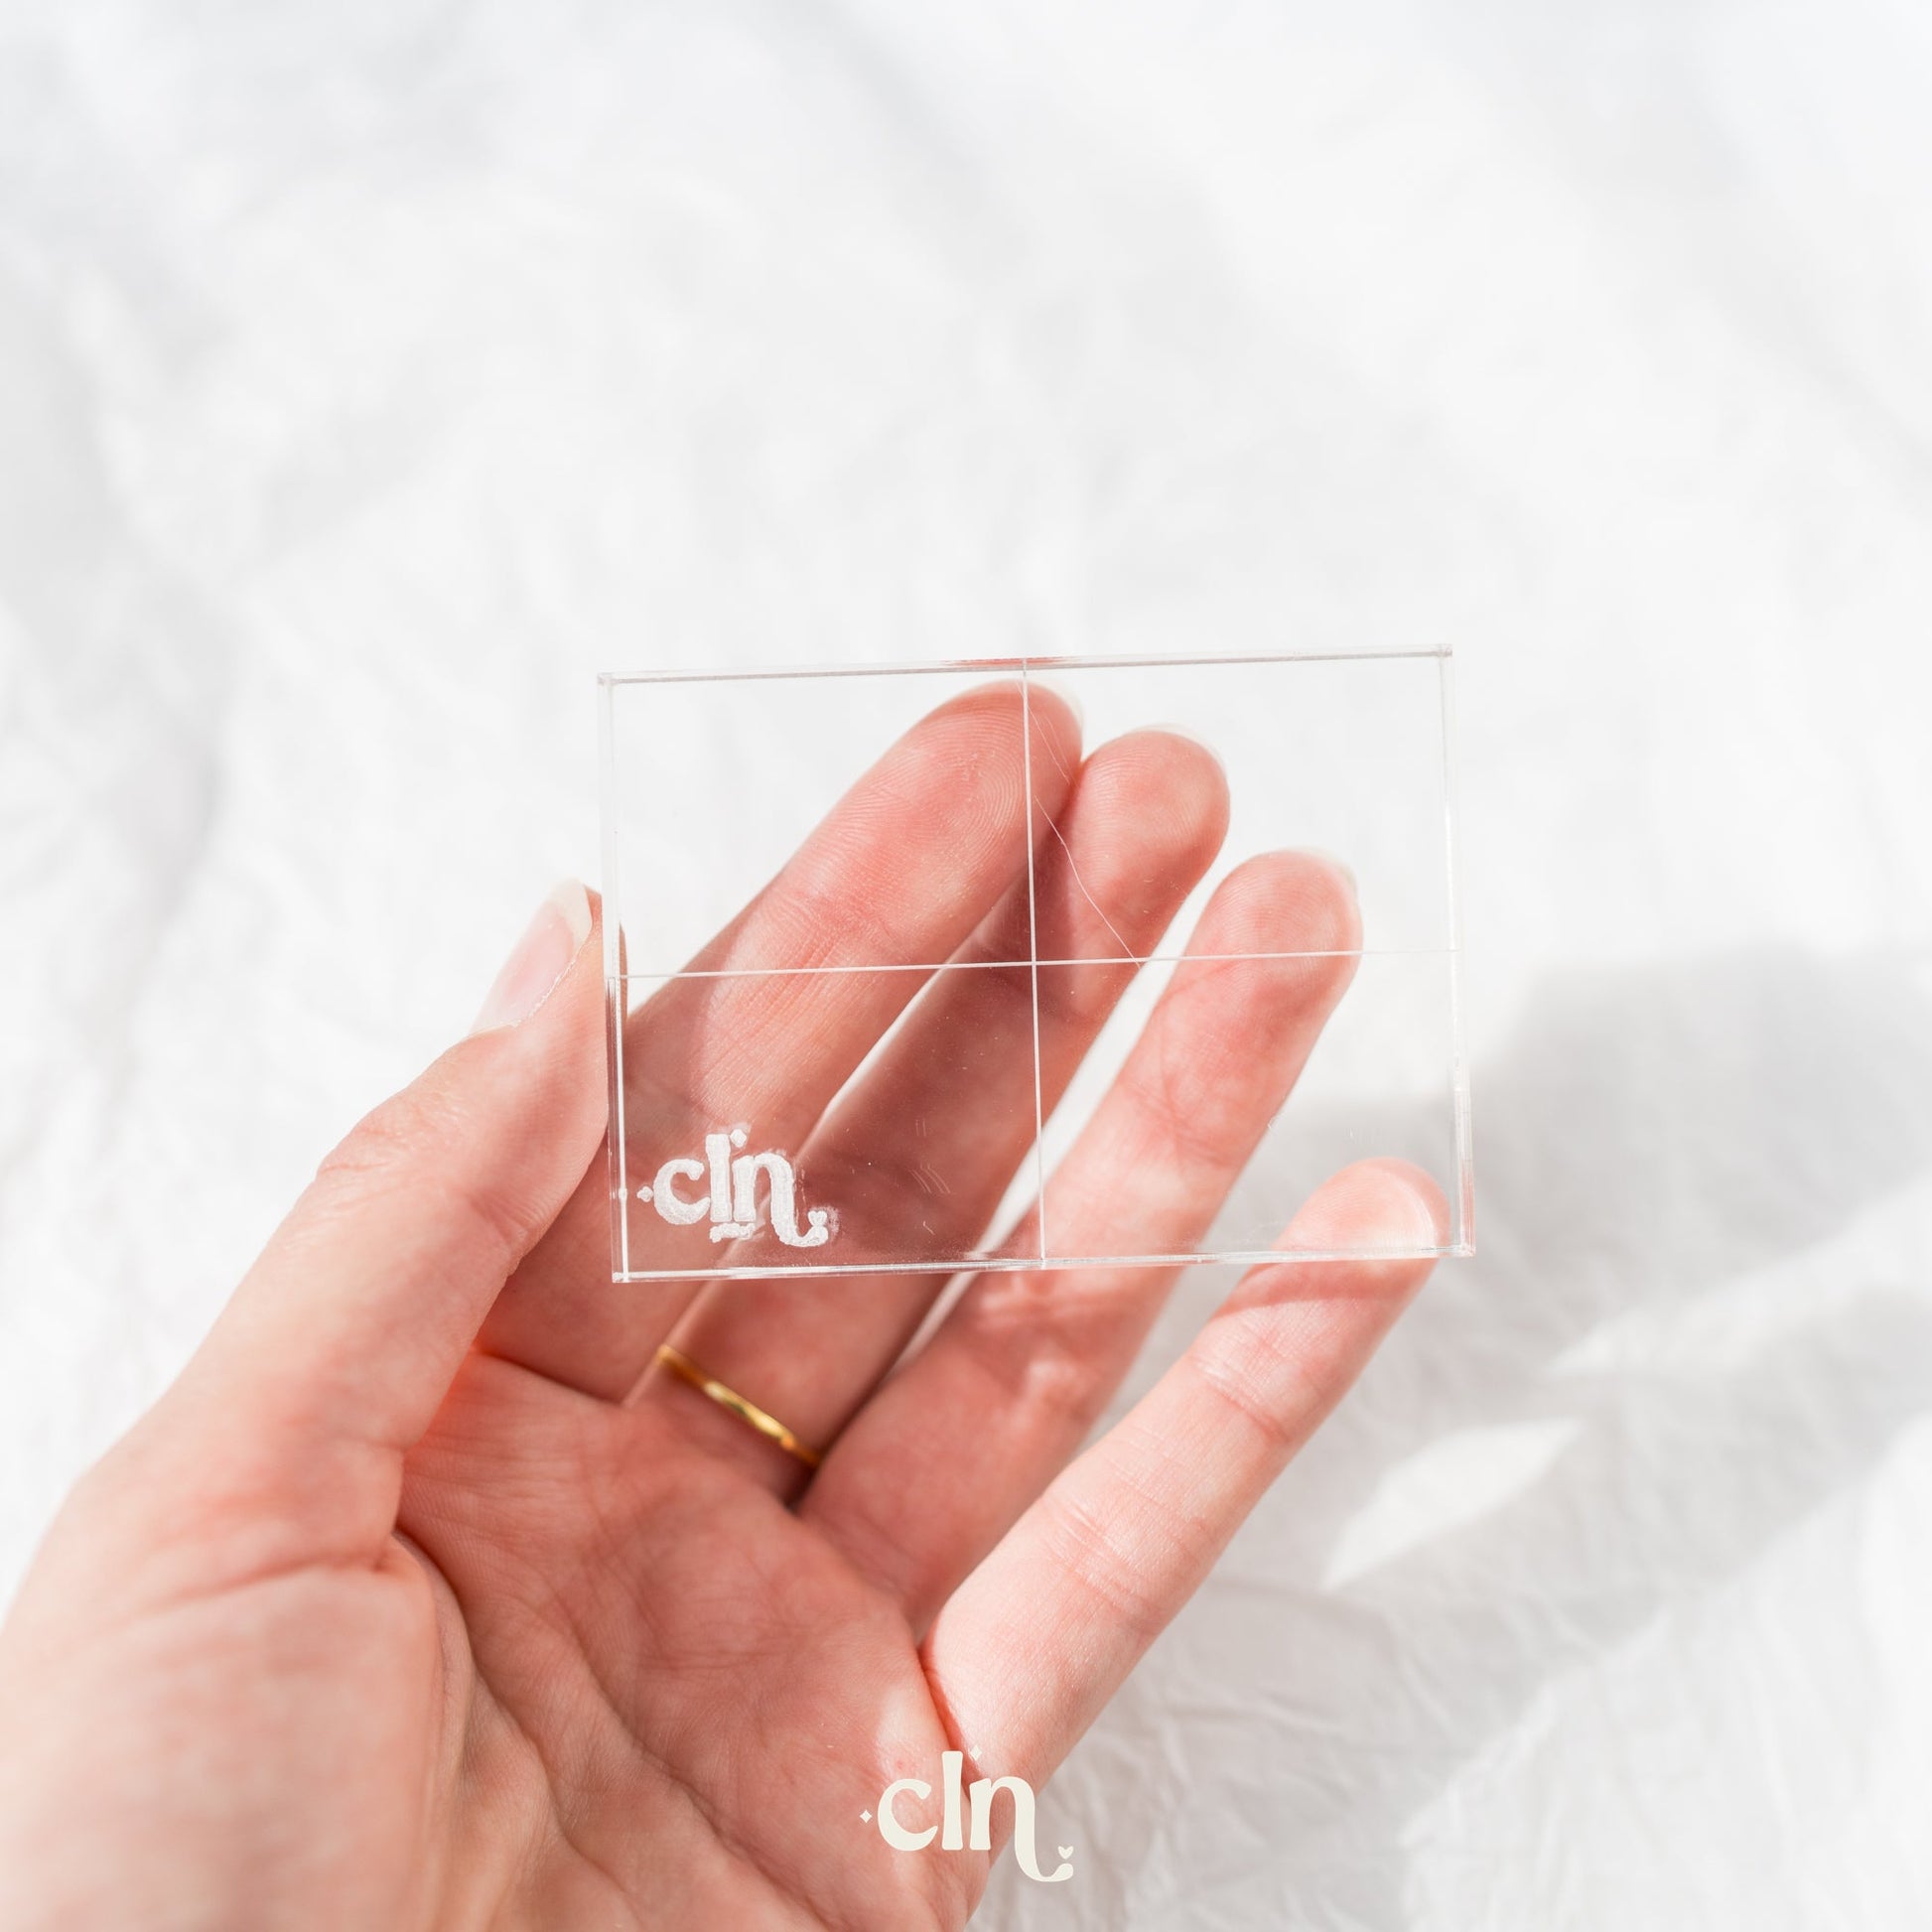 Acrylic base plate - Curated tools - CLN Atelier